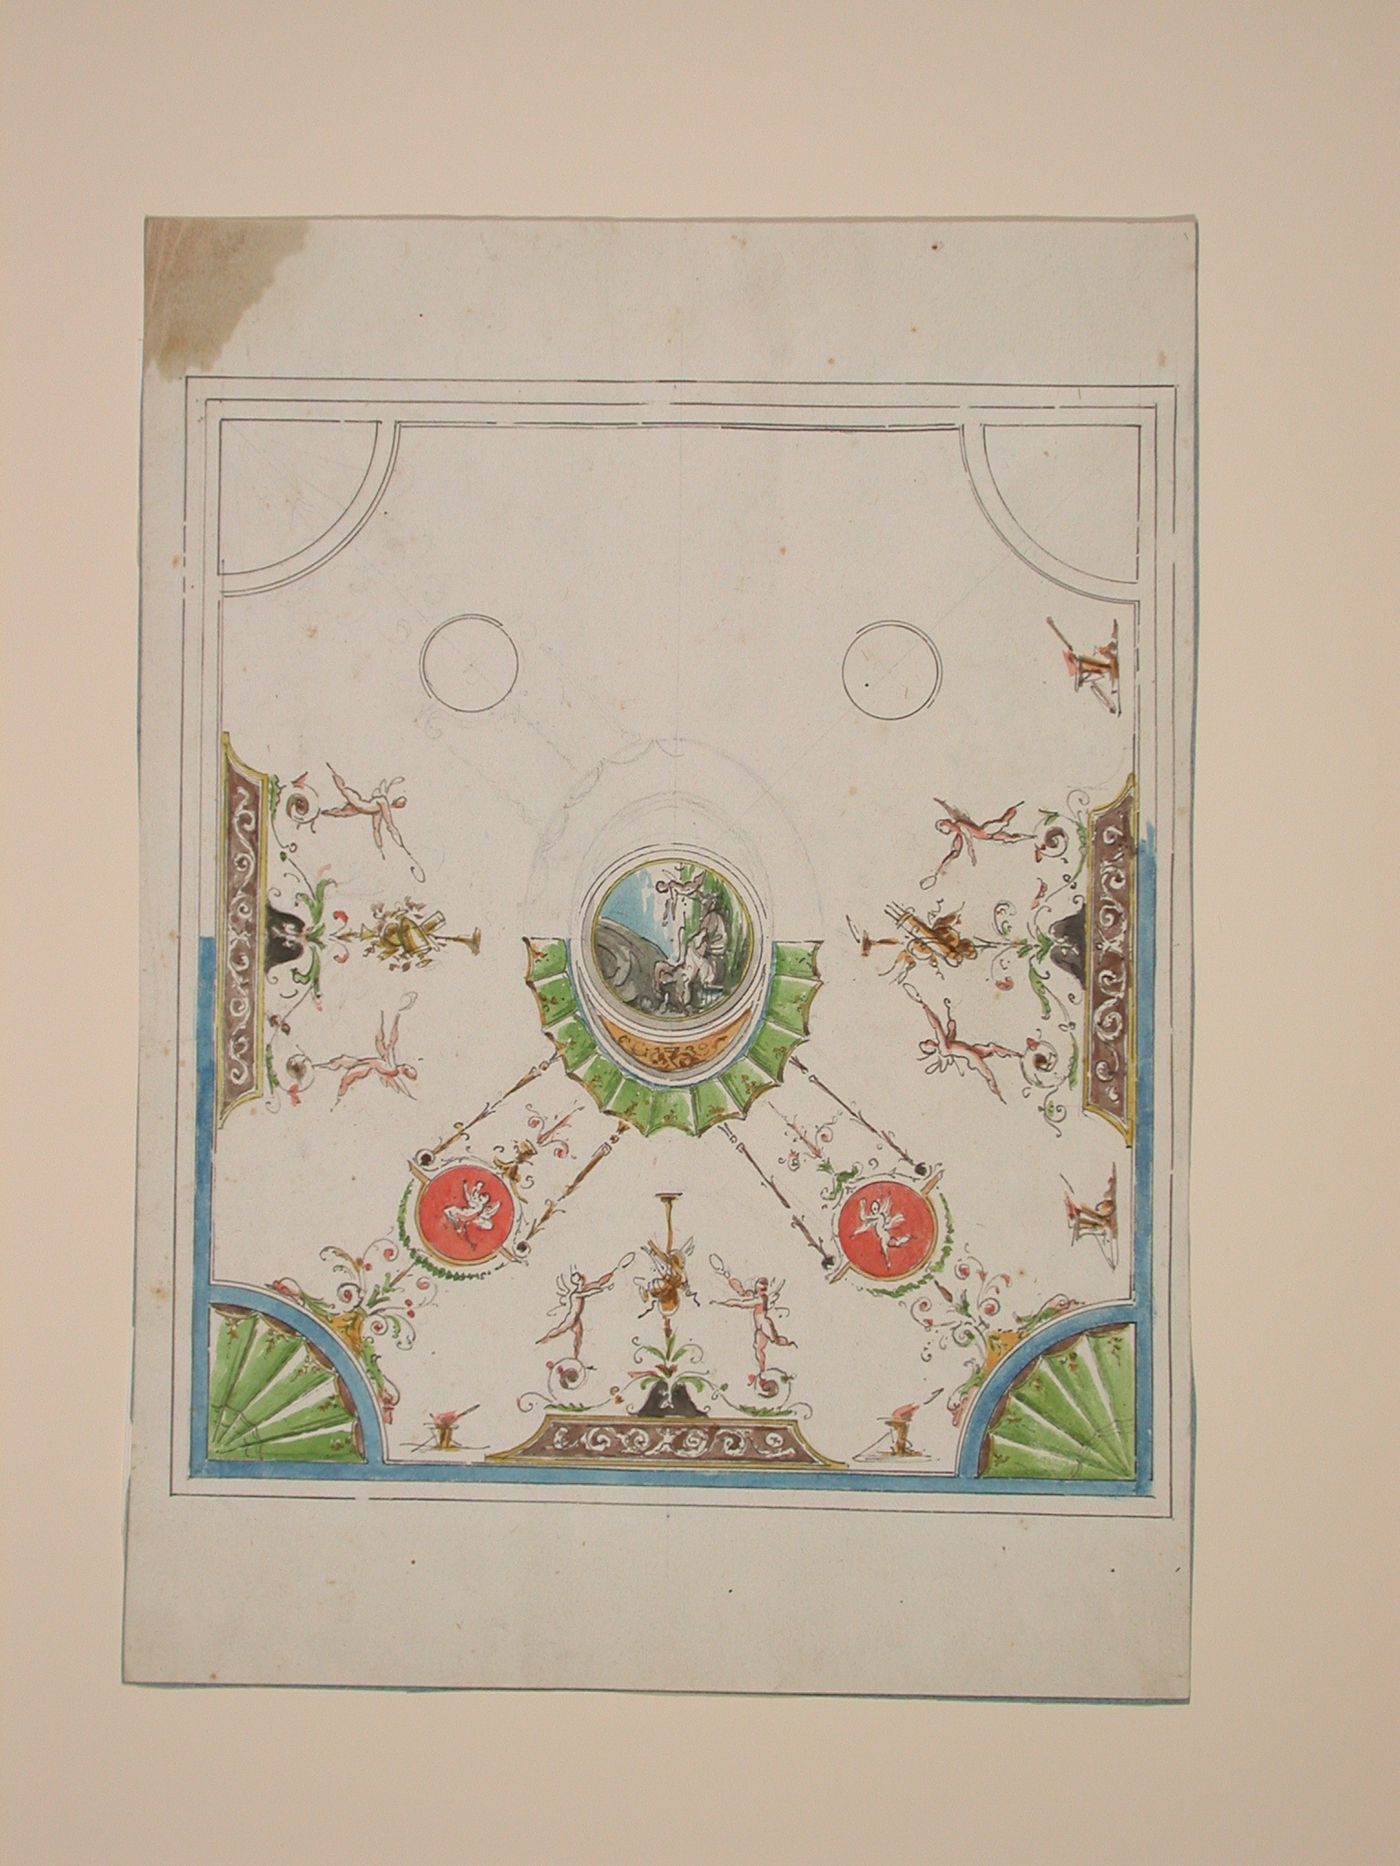 Design for a ceiling in the neo-classical style